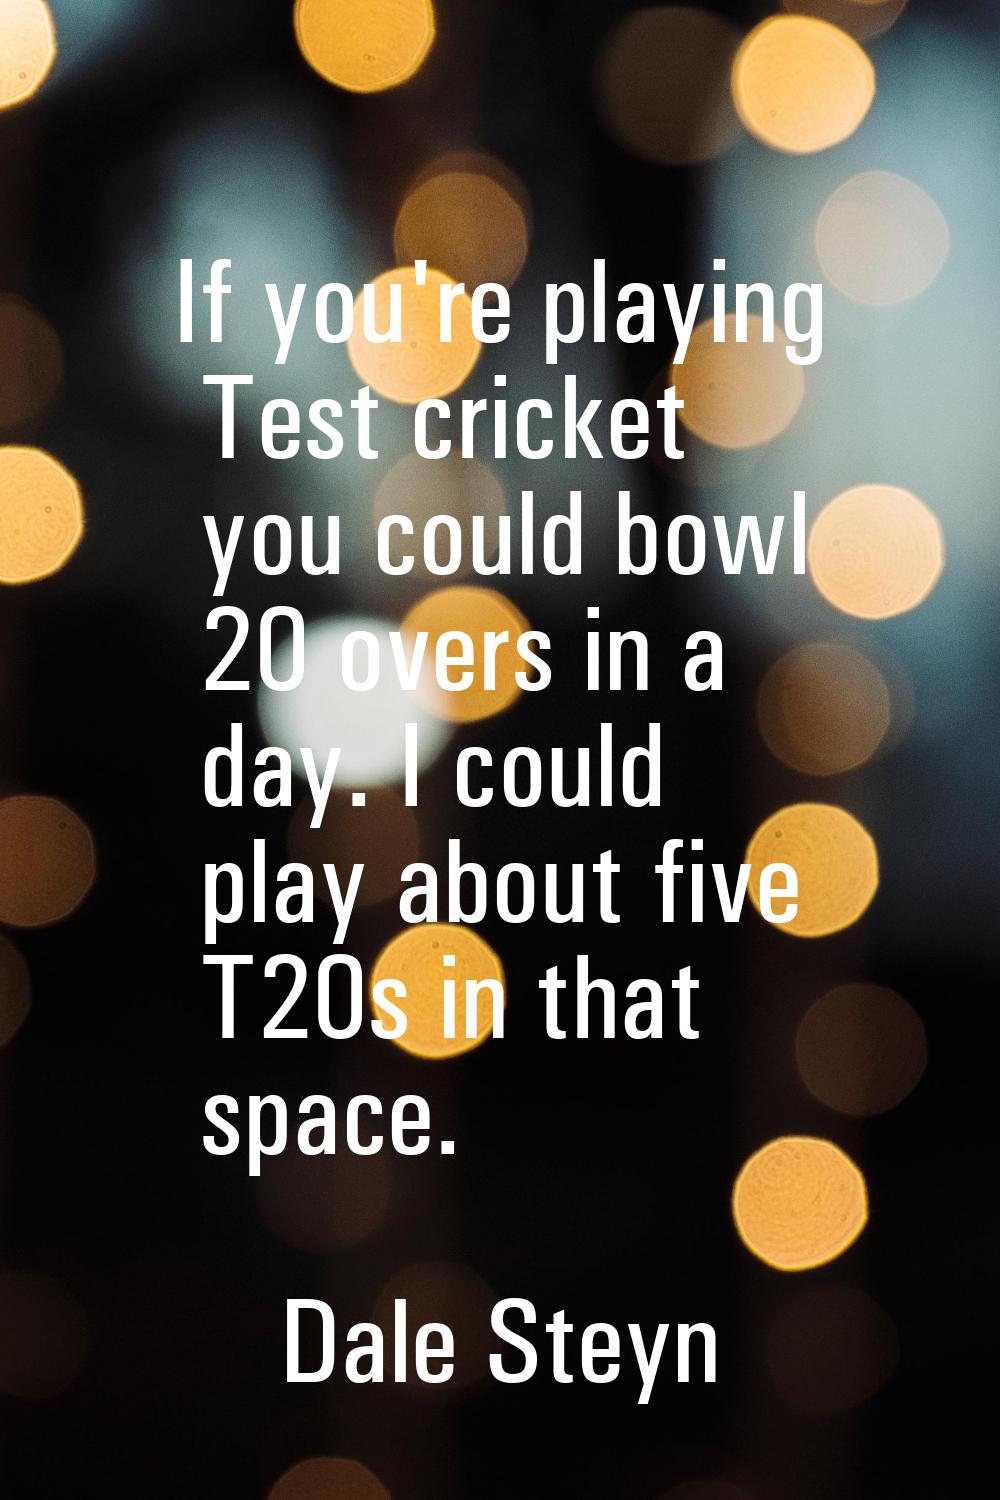 If you're playing Test cricket you could bowl 20 overs in a day. I could play about five T20s in th